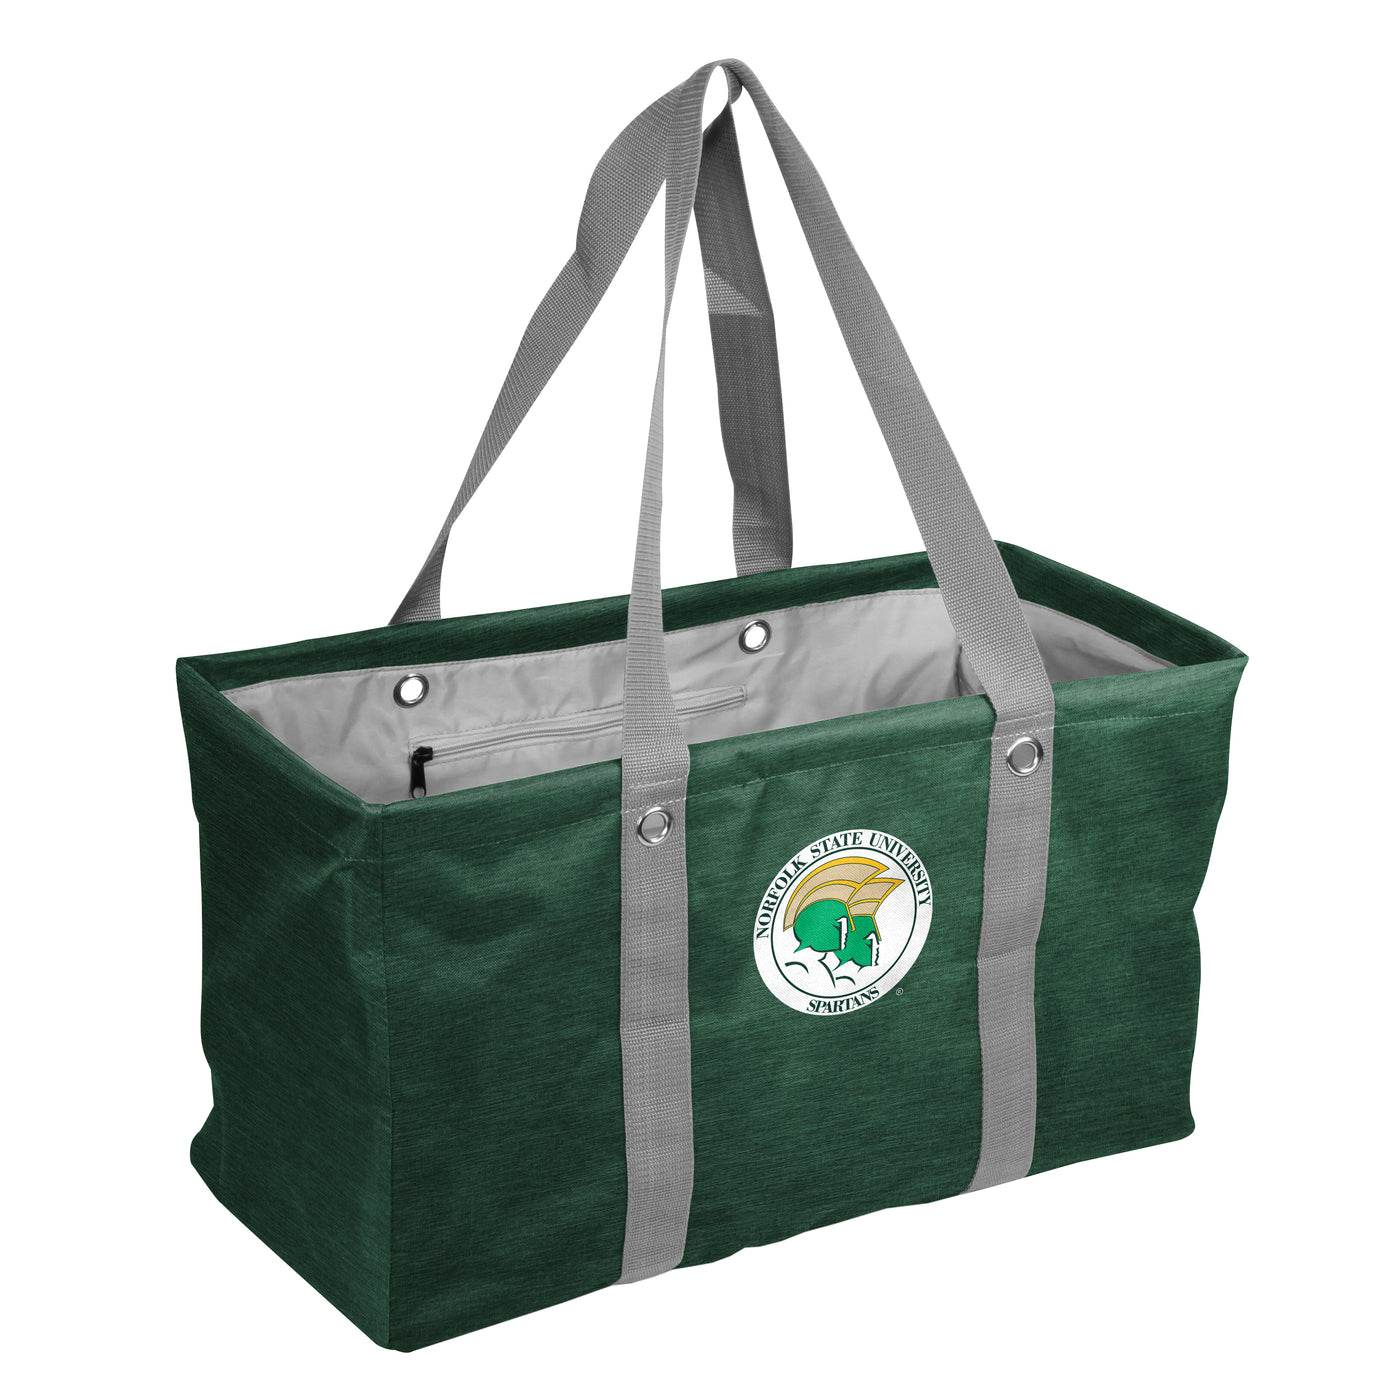 Norfolk State Picnic Caddy